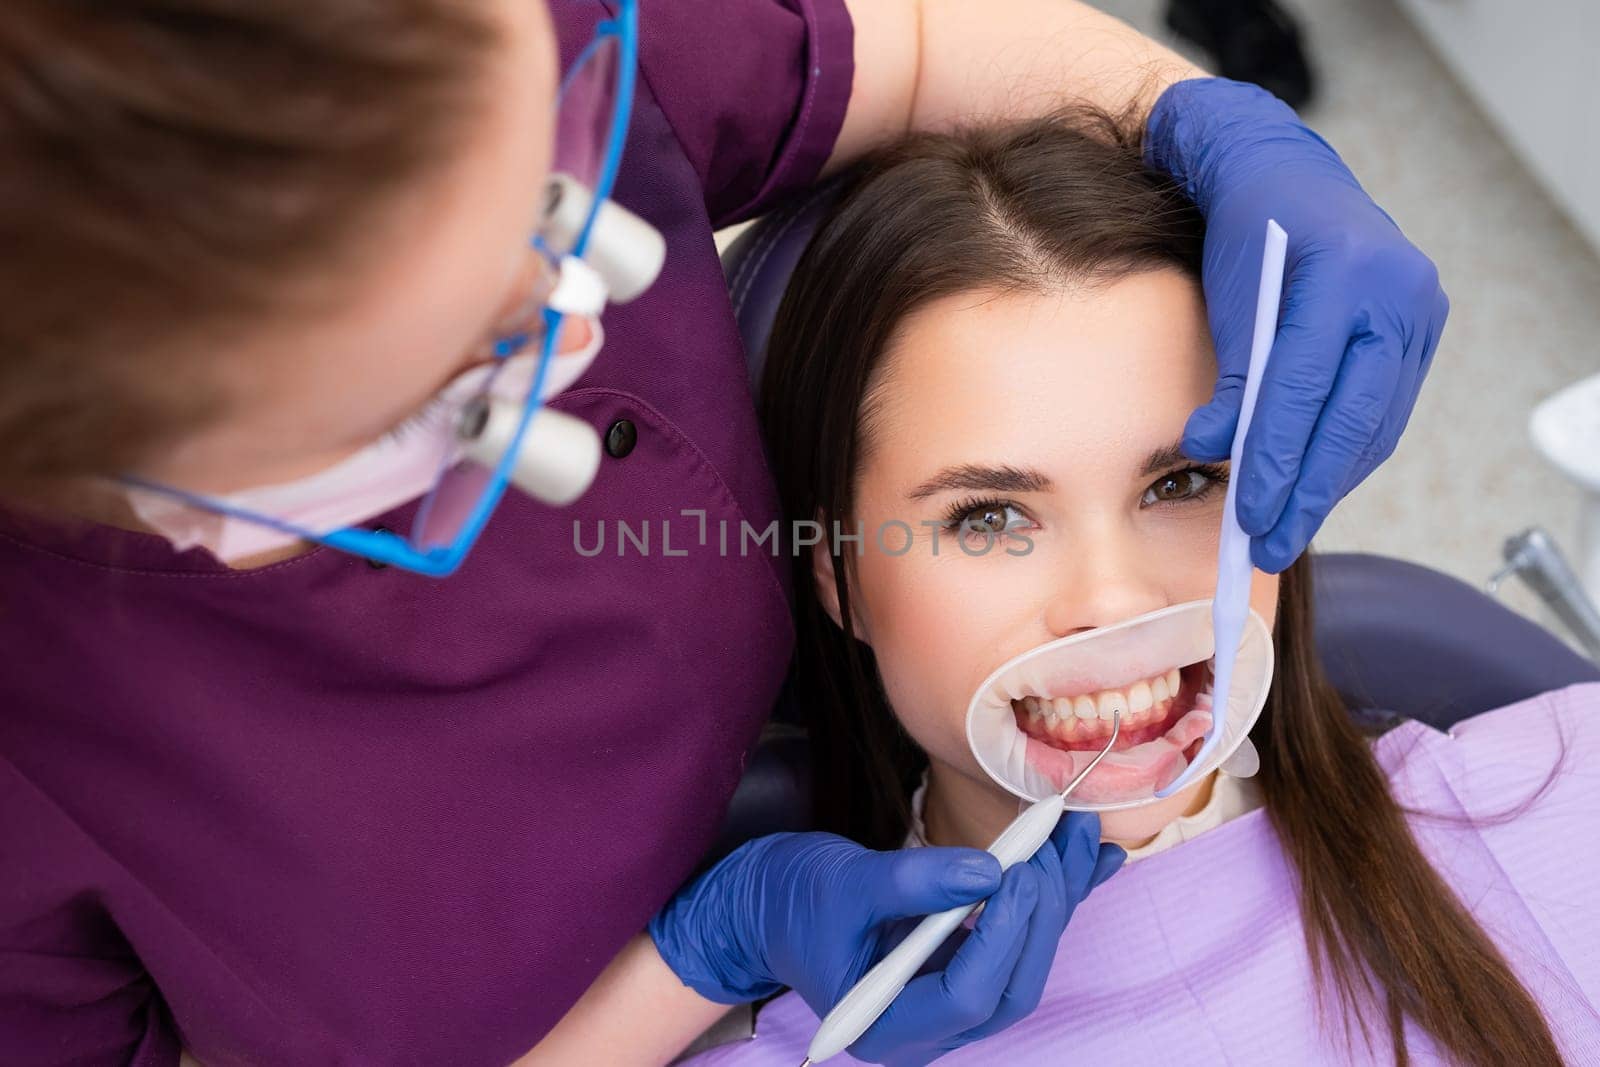 Dentist in gloves places temporary dental filling with instrument in clinic. Dental professional fills tooth space with filling composition